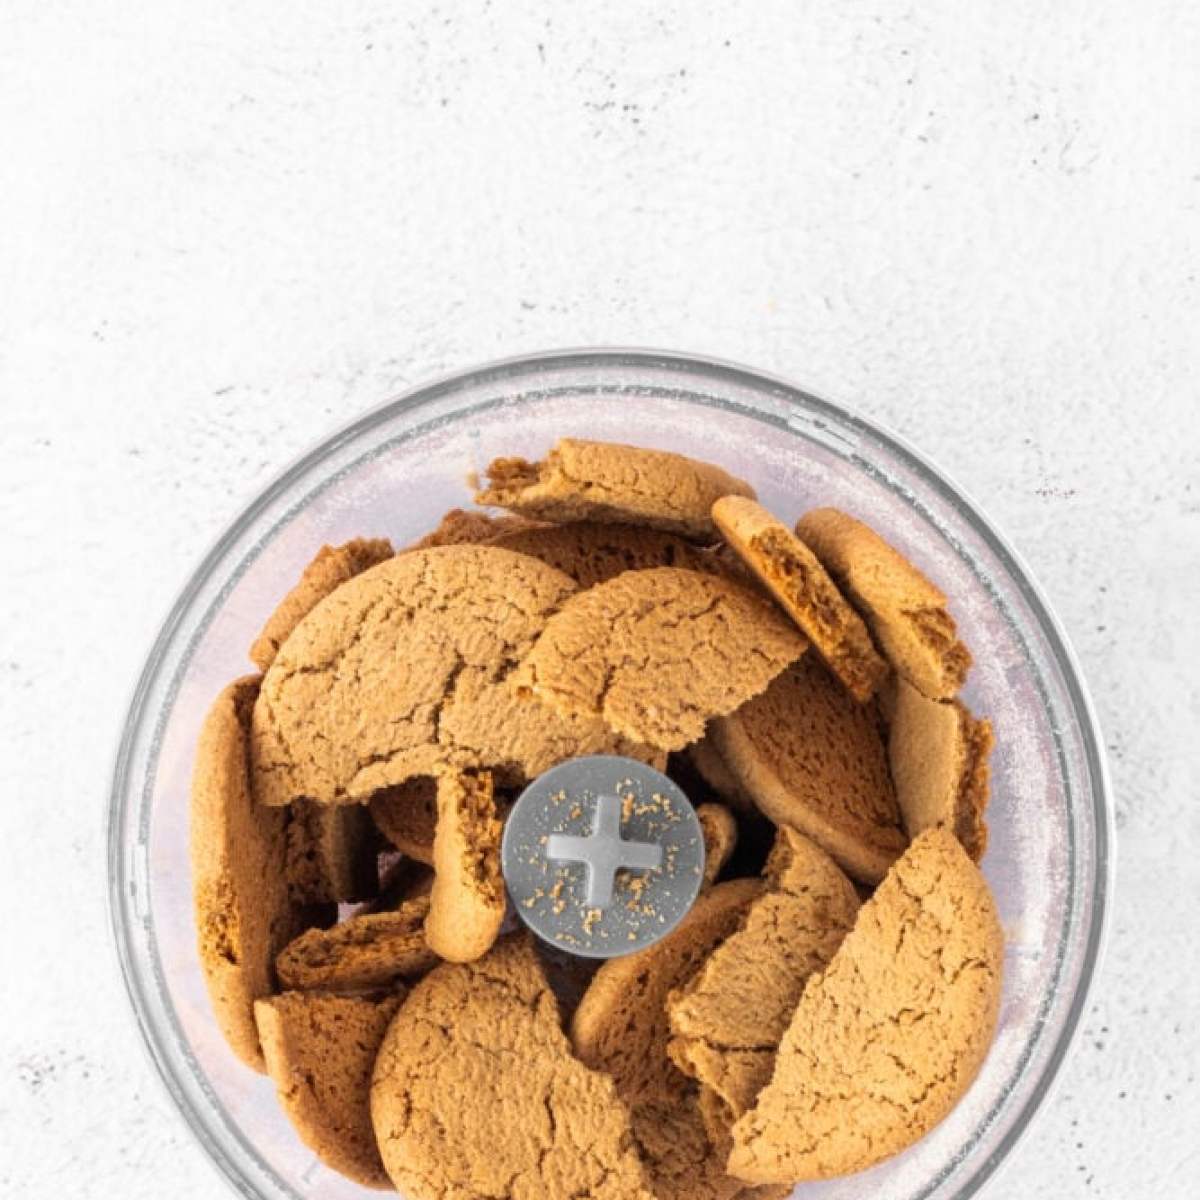 Ginger cookies in a glass bowl on a white background.